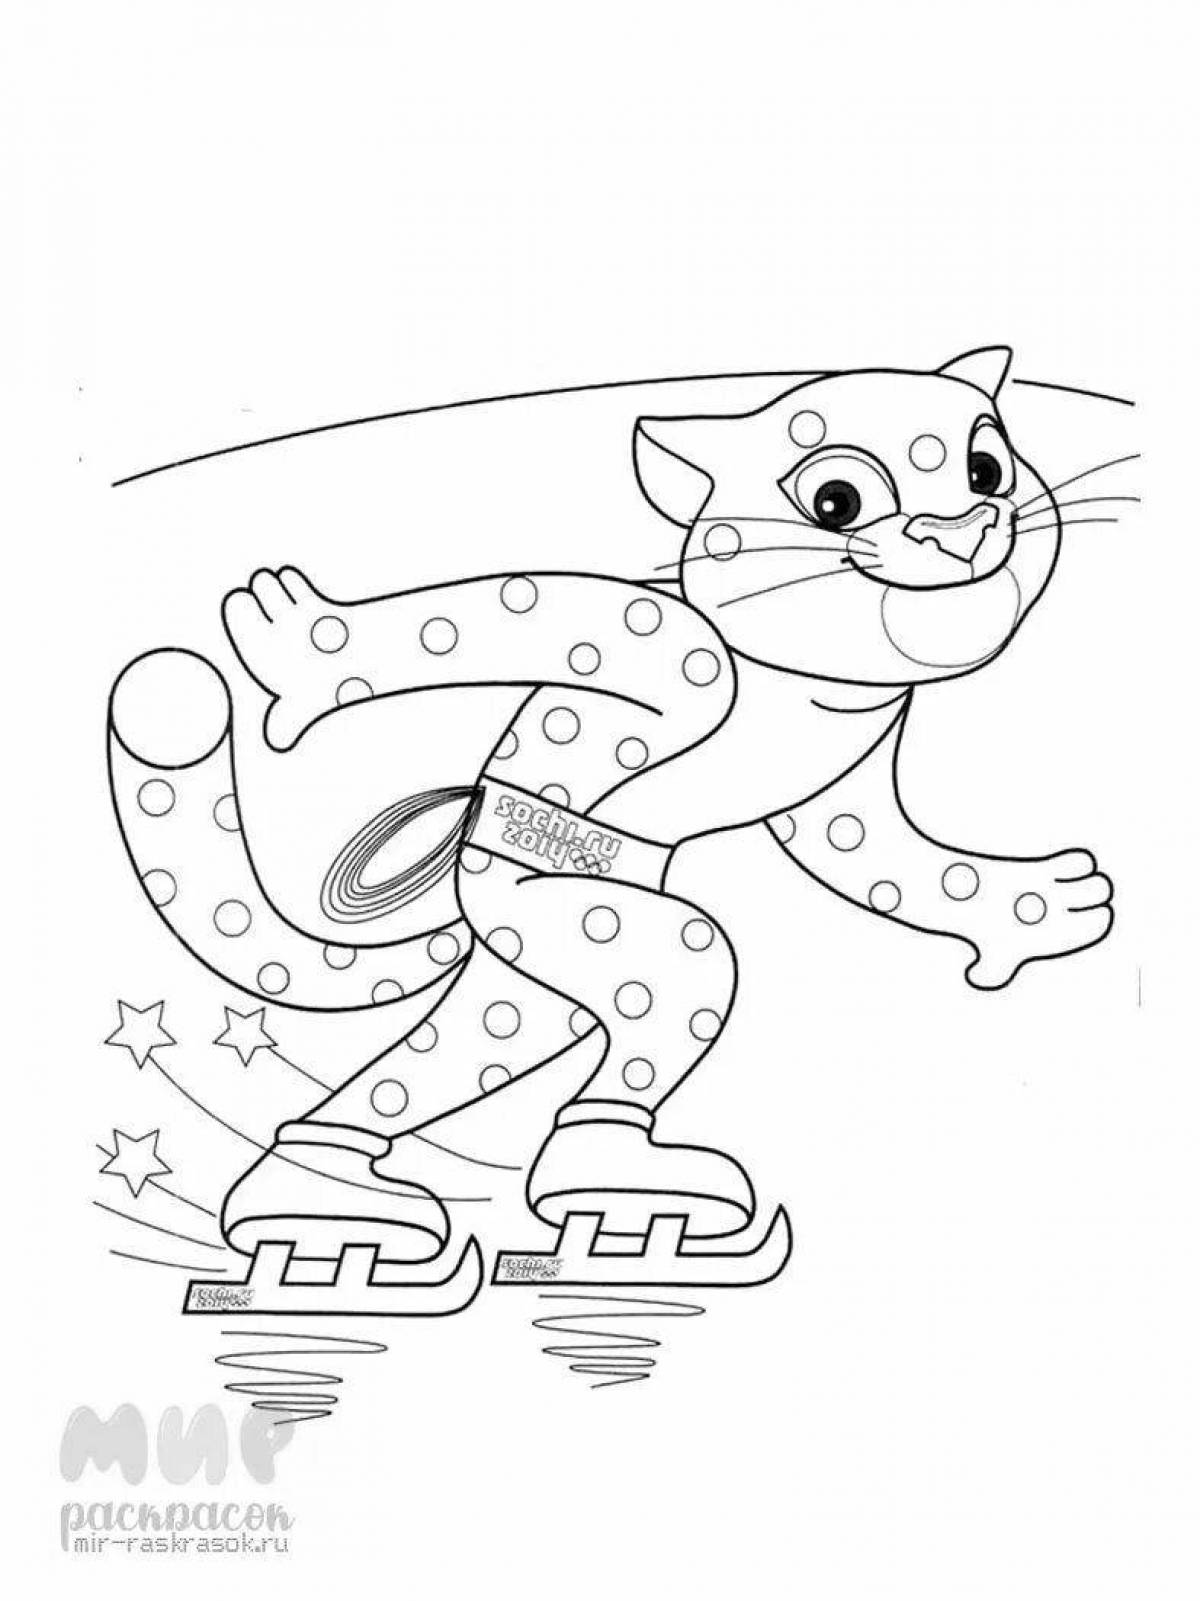 Coloring page festive winter olympic games